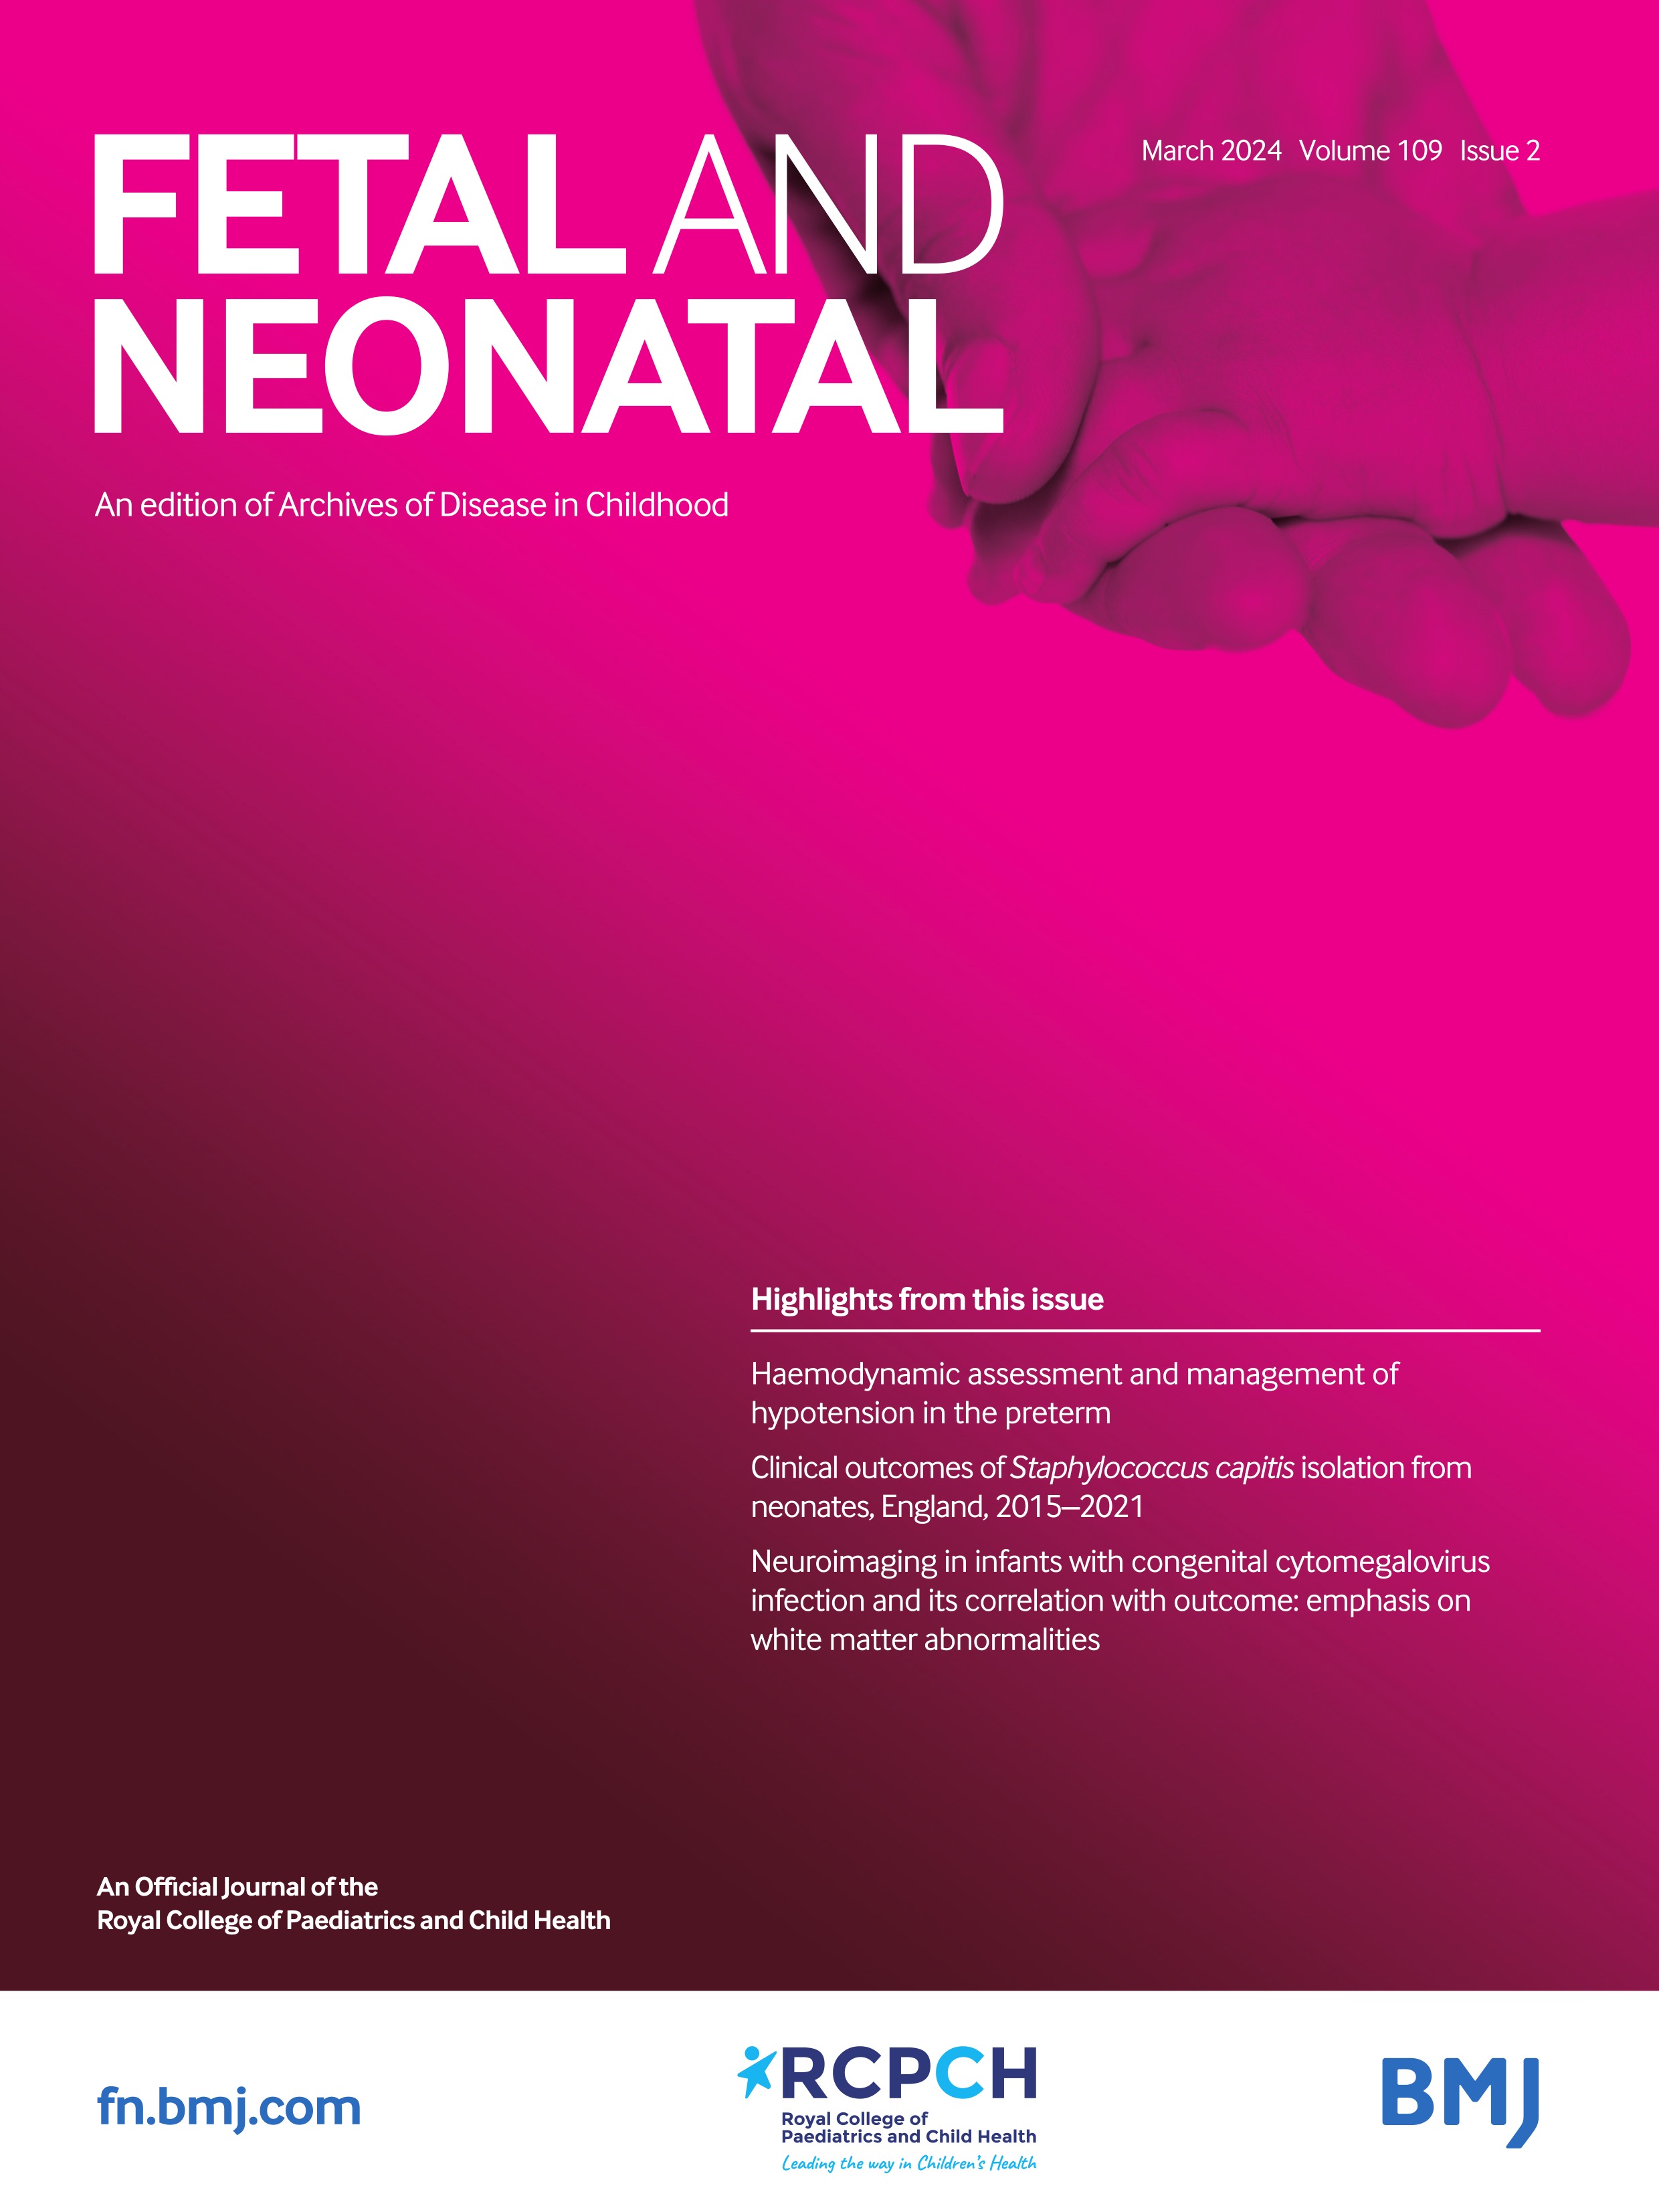 Clinical outcomes of Staphylococcus capitis isolation from neonates, England, 2015-2021: a retrospective case-control study